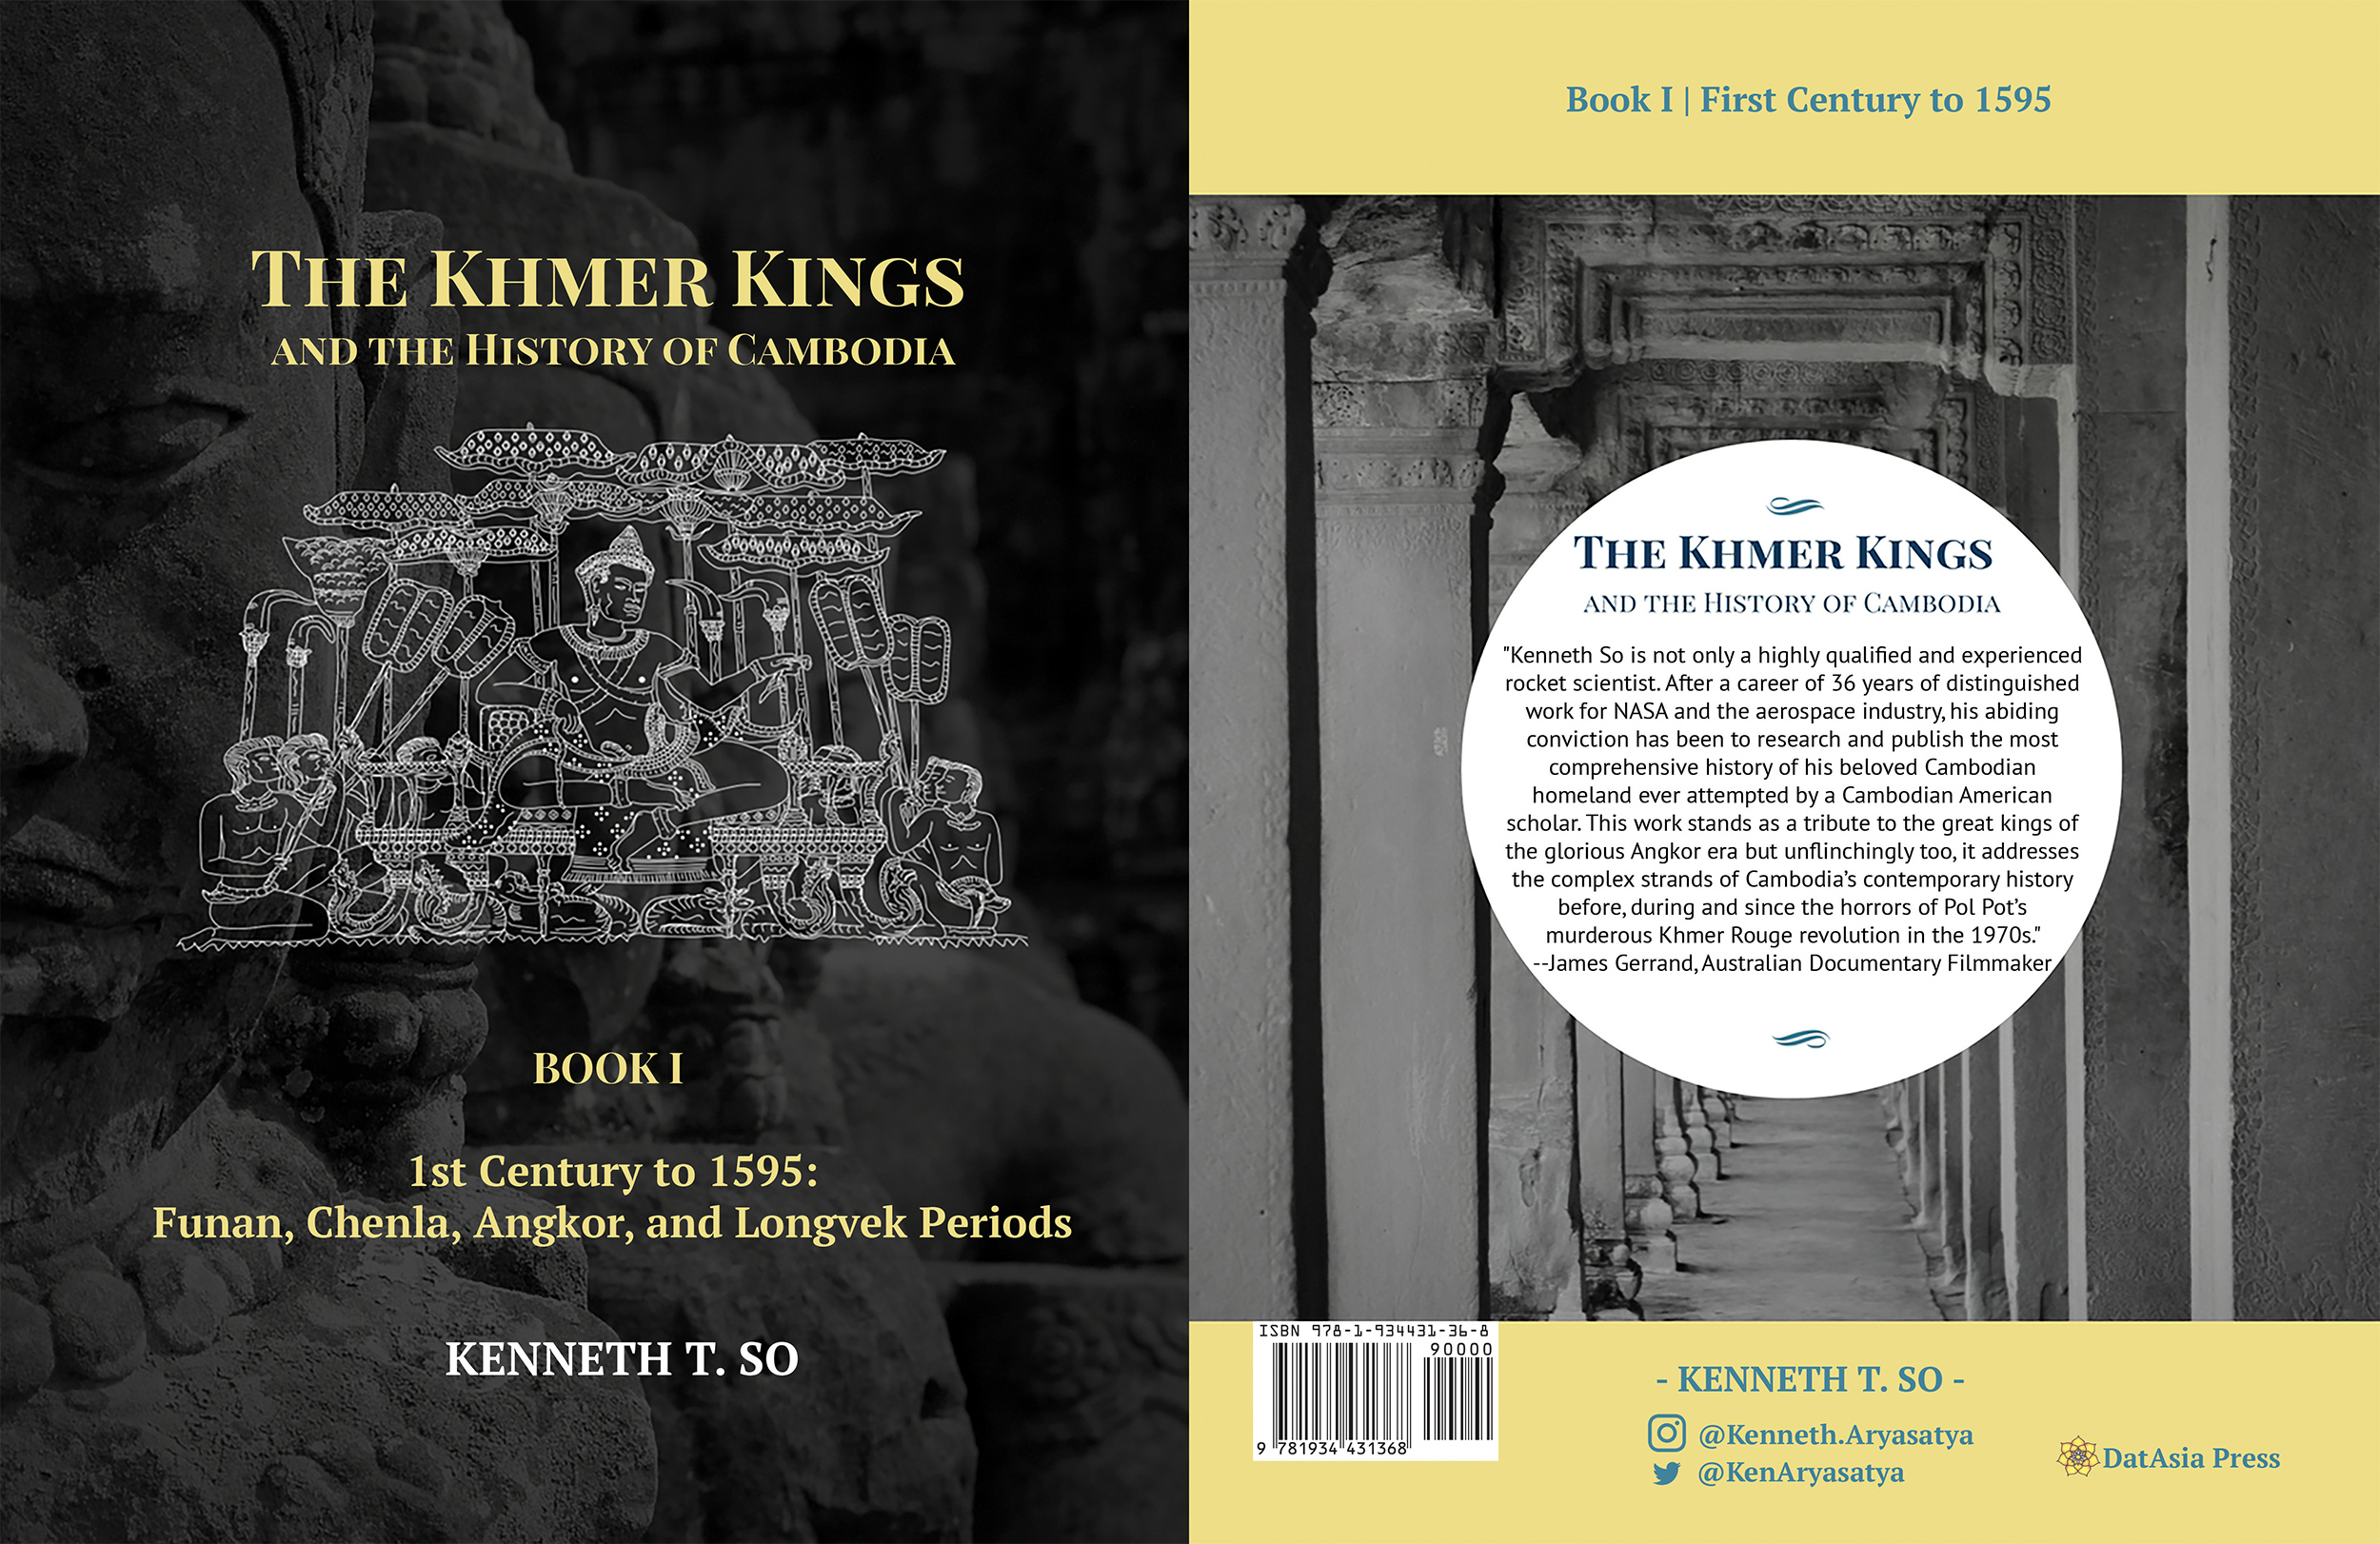 "The Khmer Kings and the History of Cambodia–BOOK I–1st Century to 1595: Funan, Chenla, Angkor and Longvek Periods" ISBN–978-1-934431-36-8. $39.95.